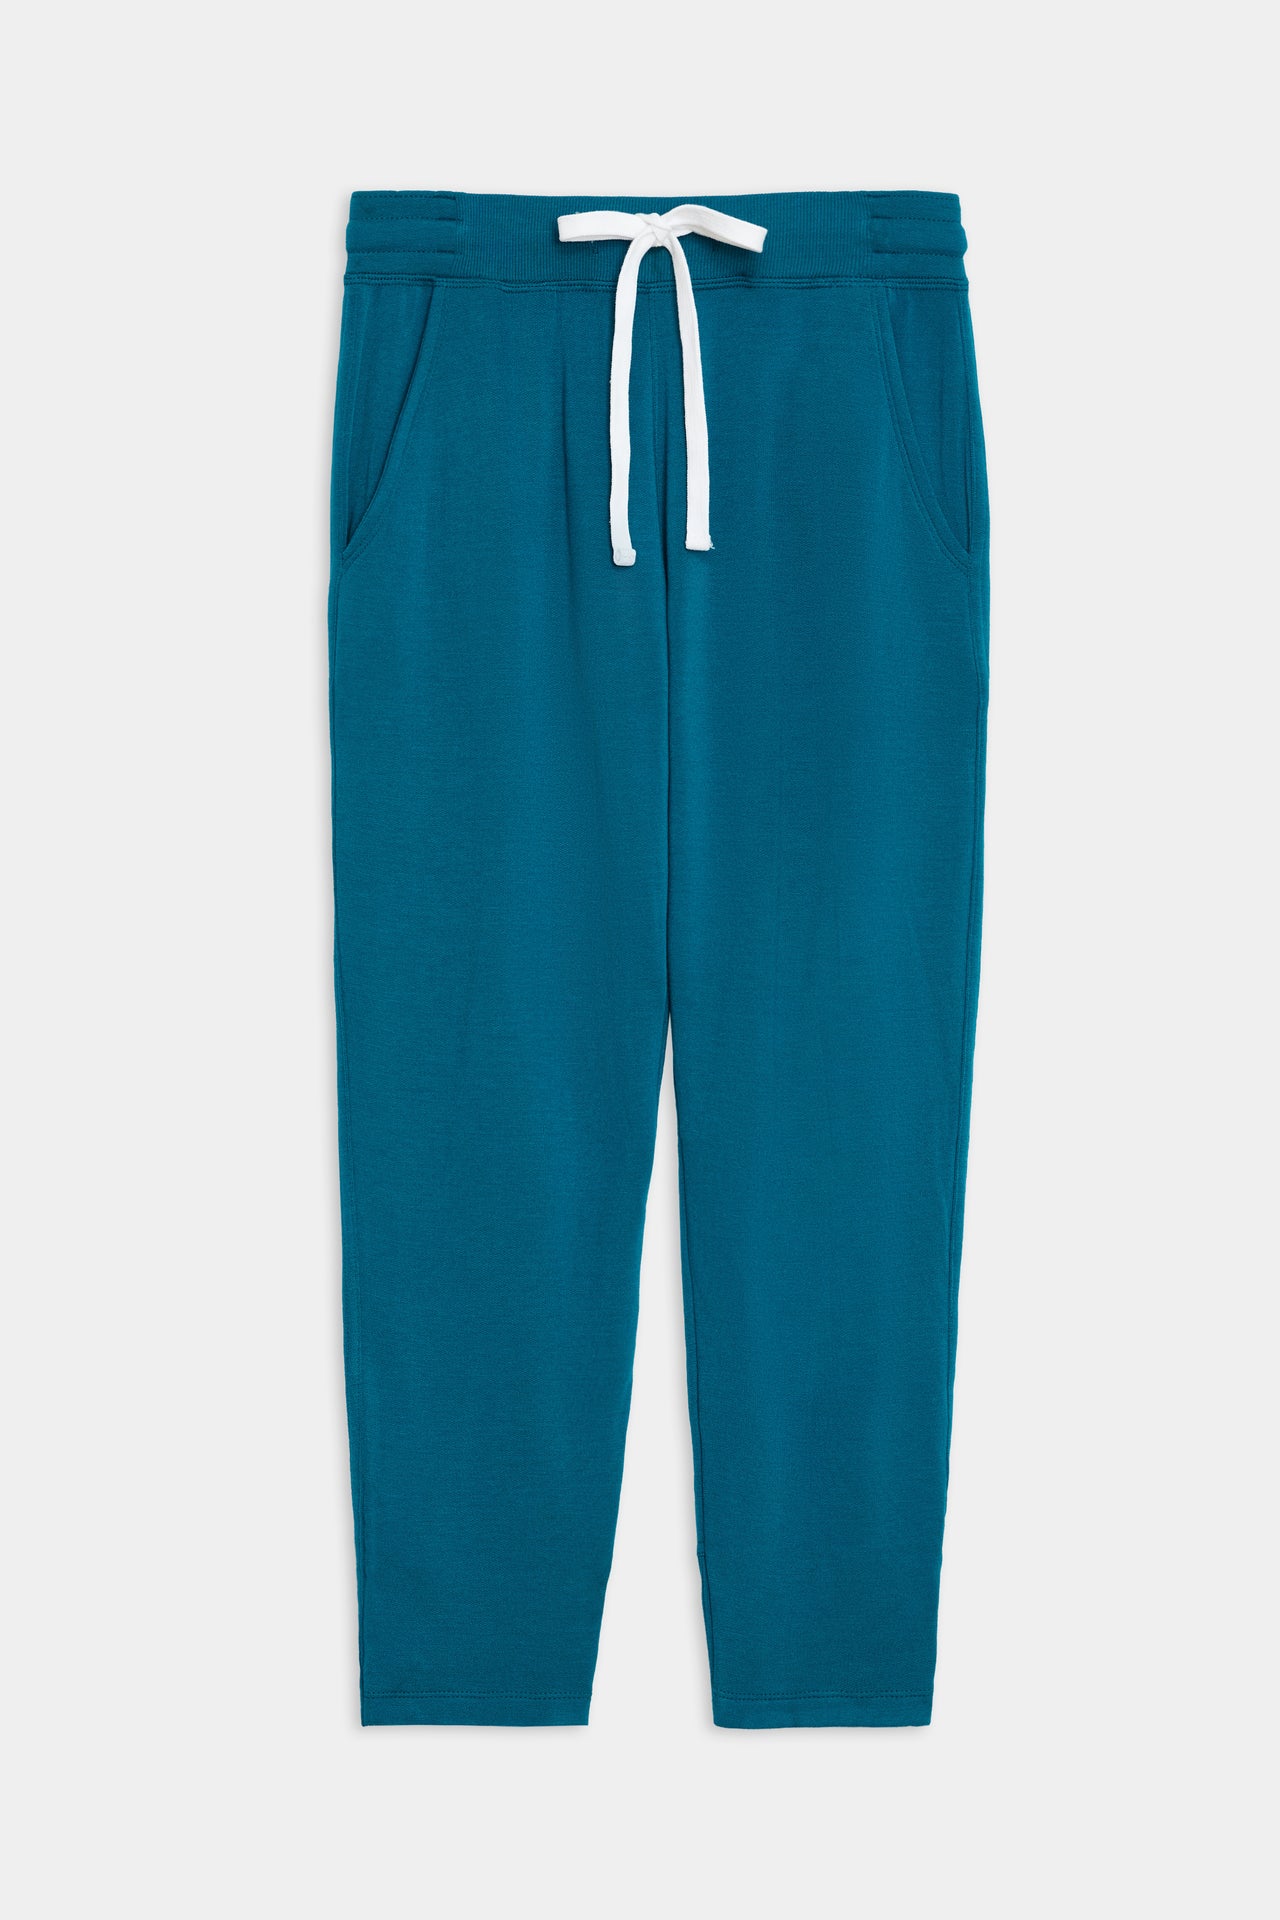 Front flat view of  green and blue tone sweatpant with tapered leg and above ankle length with white drawstring and side hip pockets